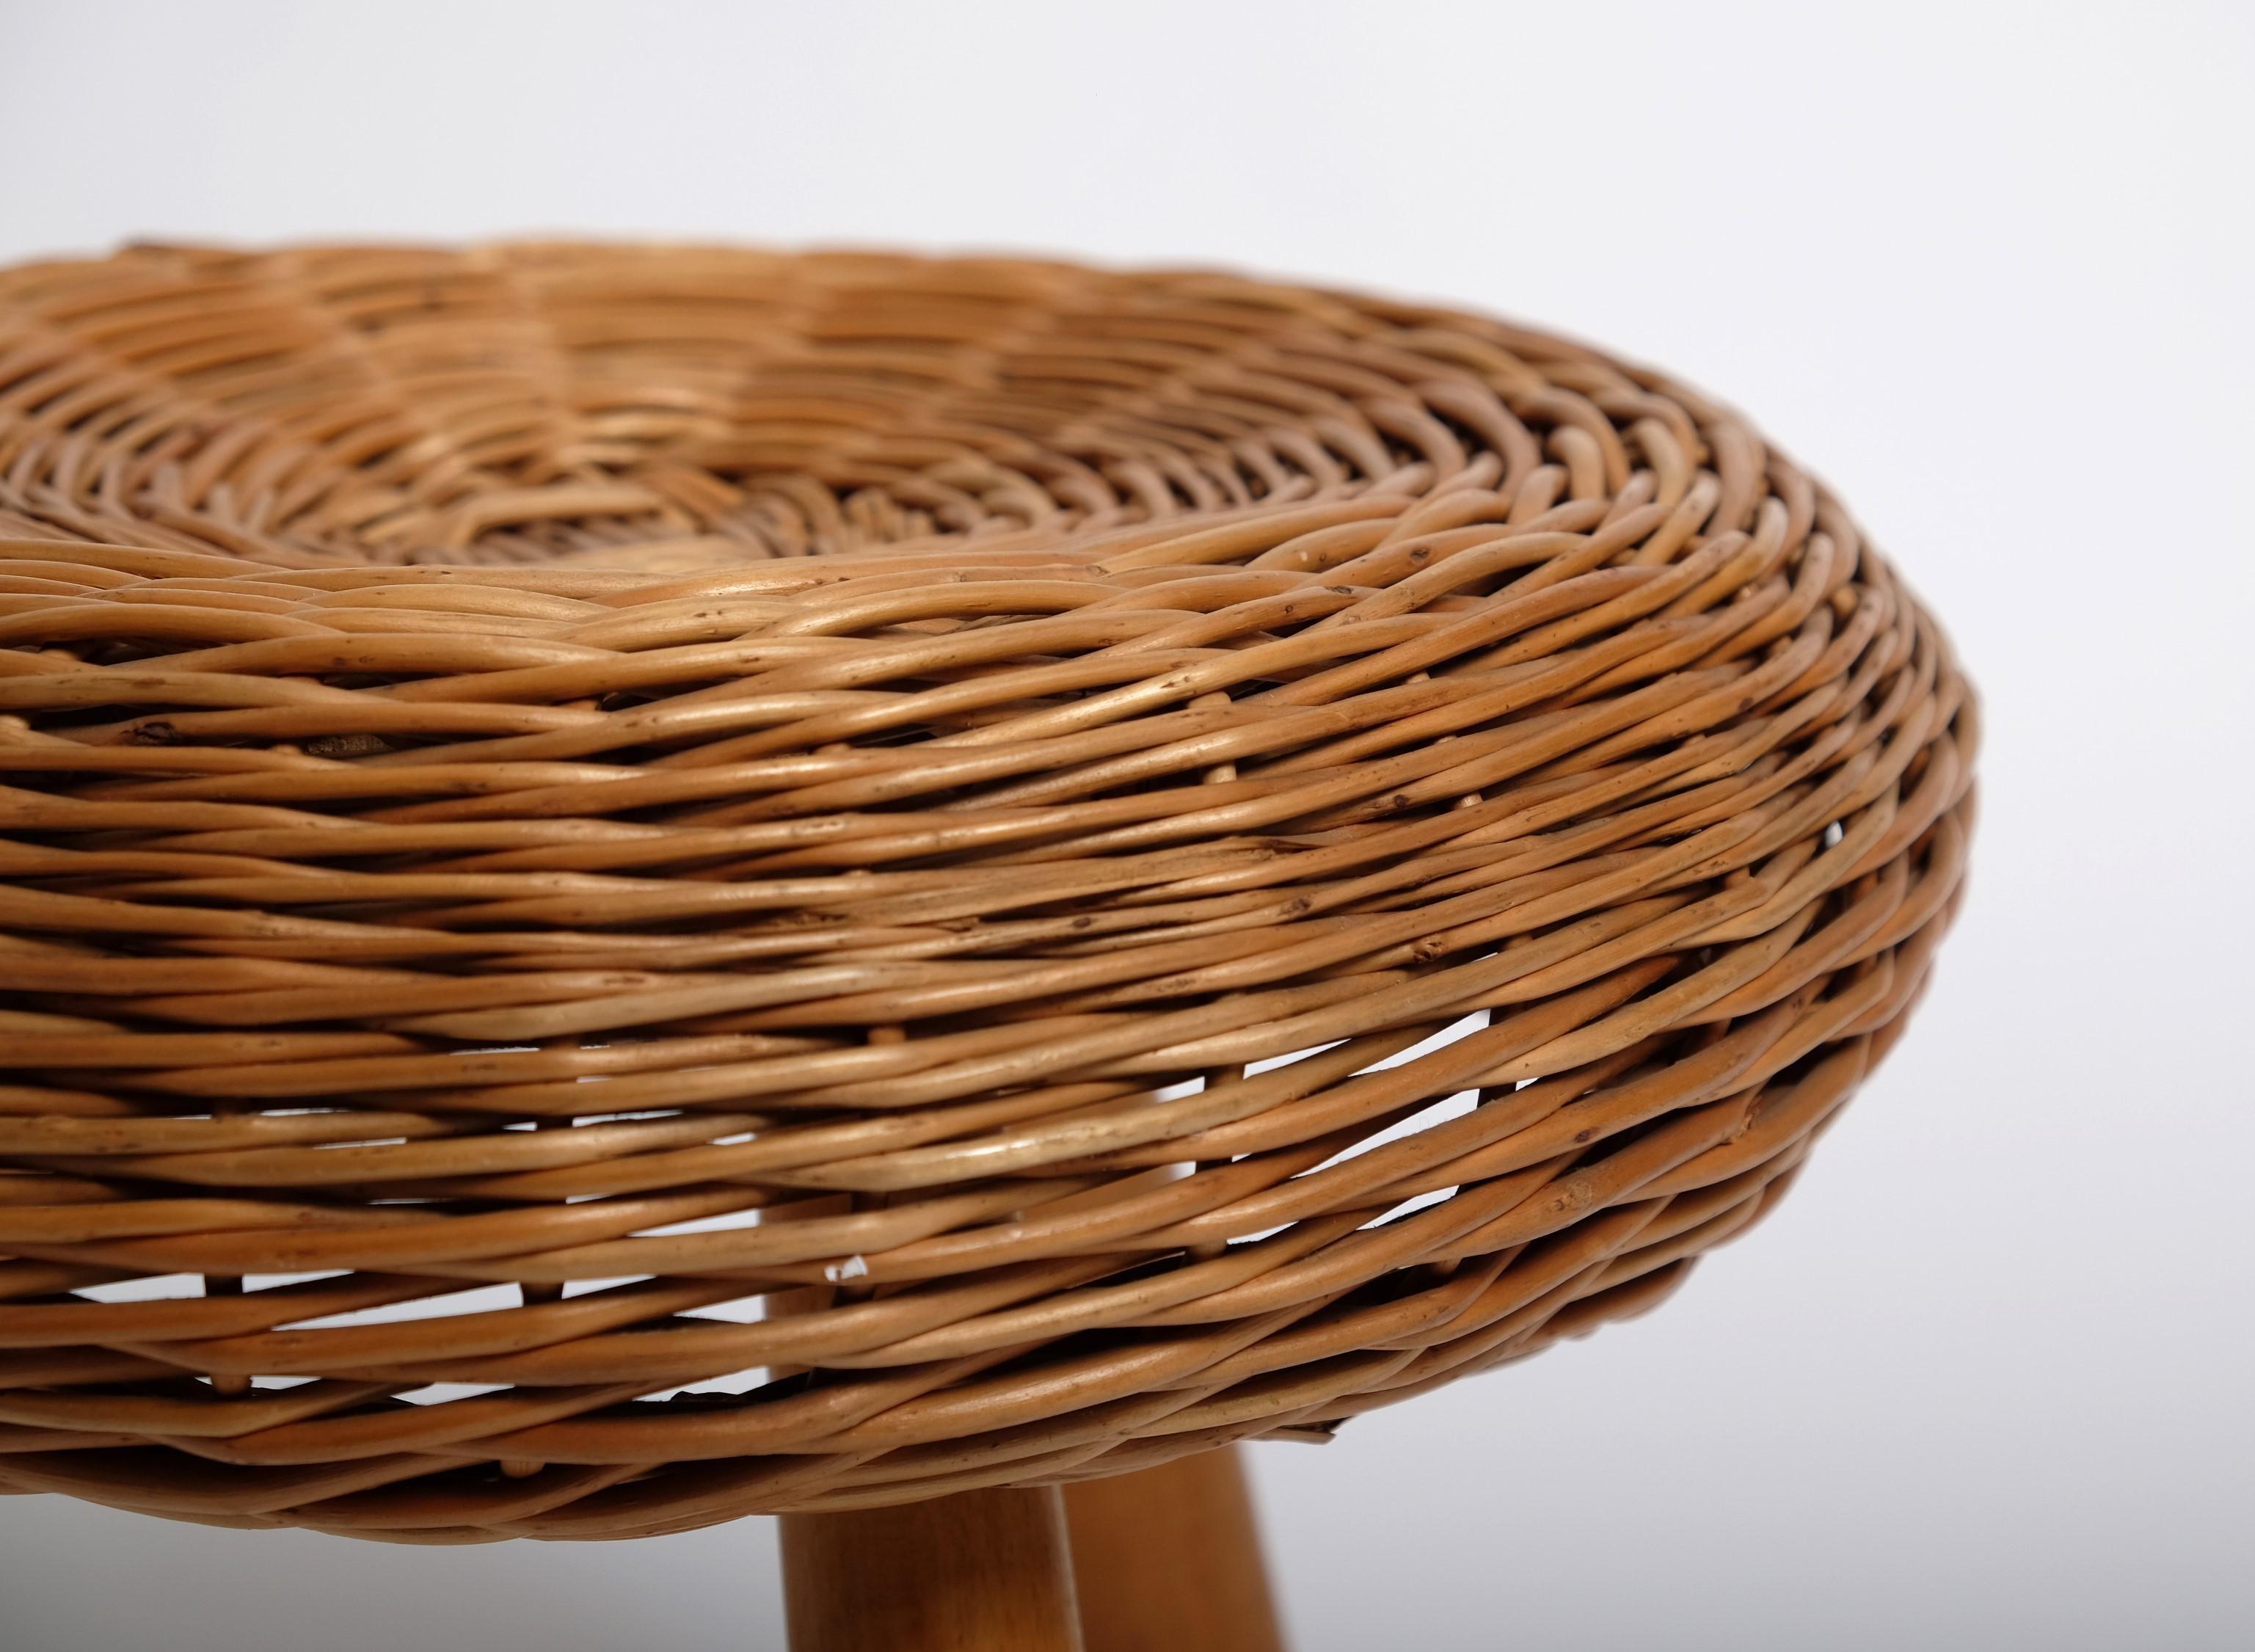 Tony Paul 'Attributed' Stool Wicker Wood, United States 1950s For Sale 7